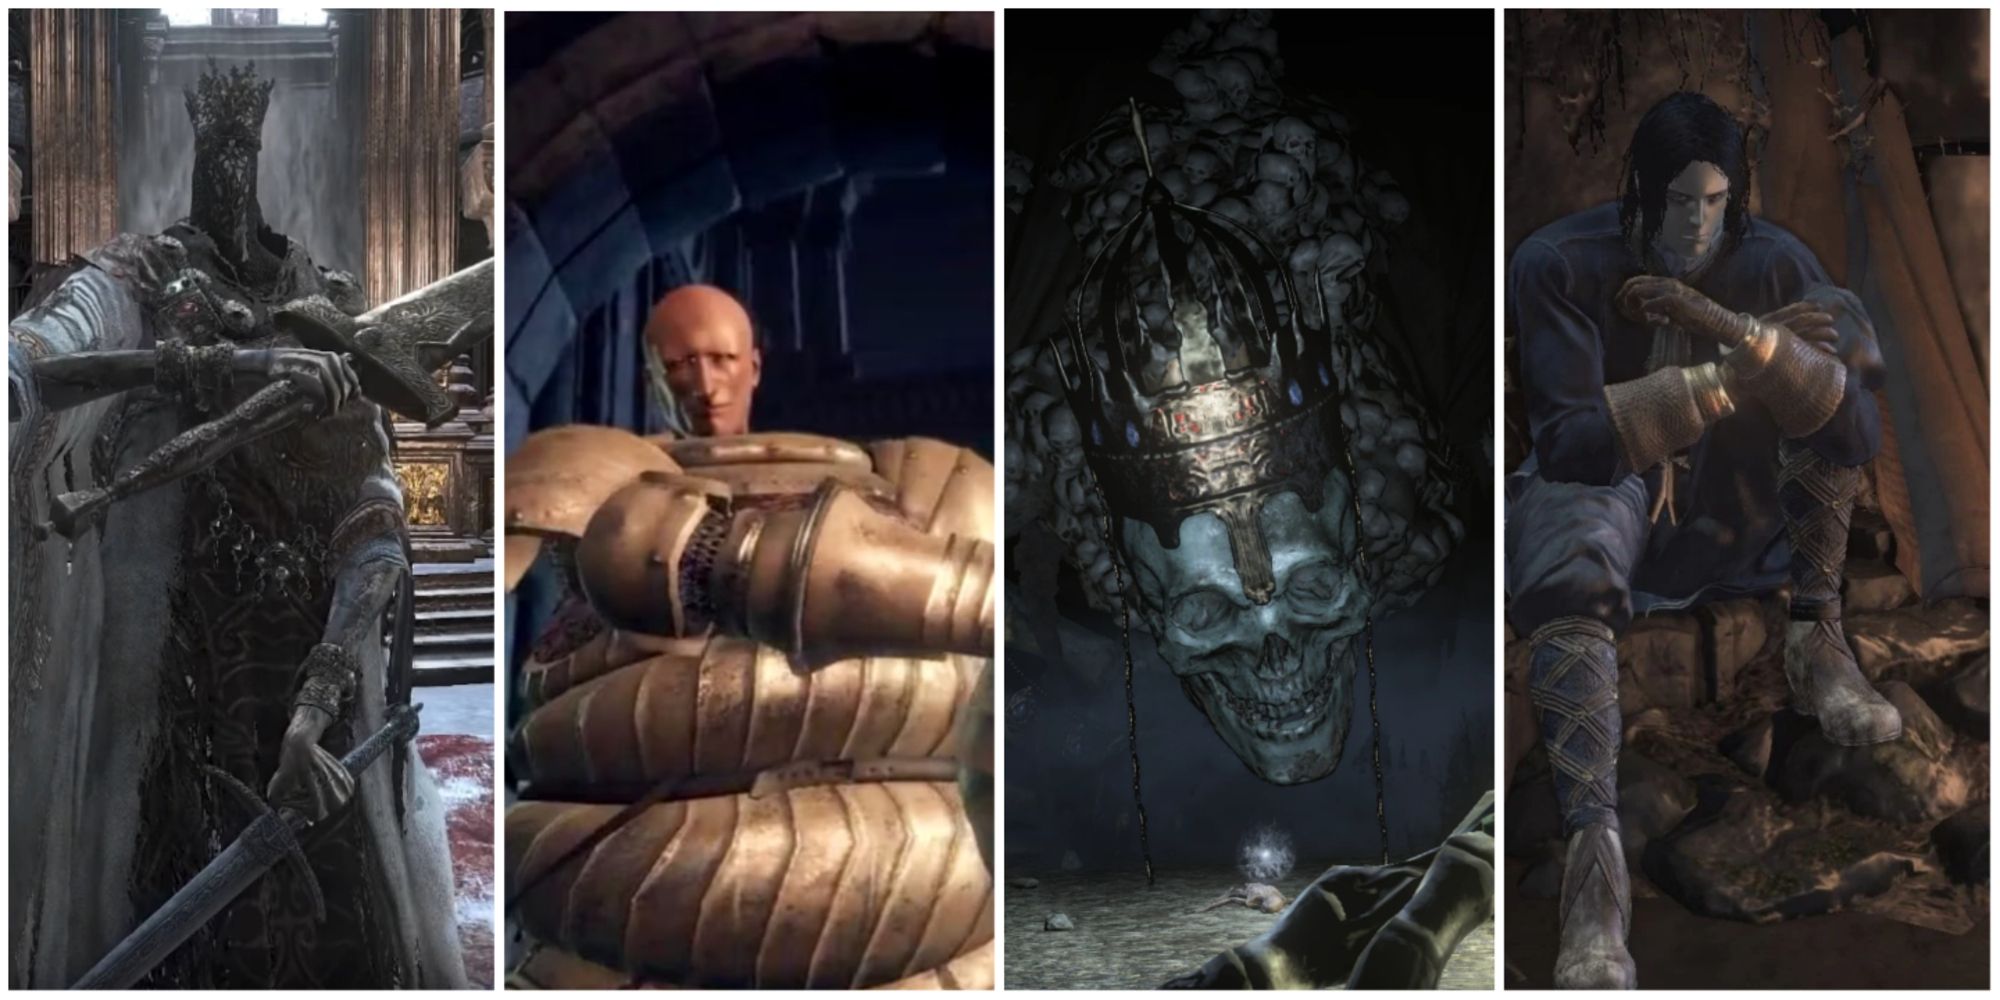 Pontiff Sulyvahn, Unbreakable Patches, High Lord Wolnir, and Orbeck of Vinheim from Dark Souls 3